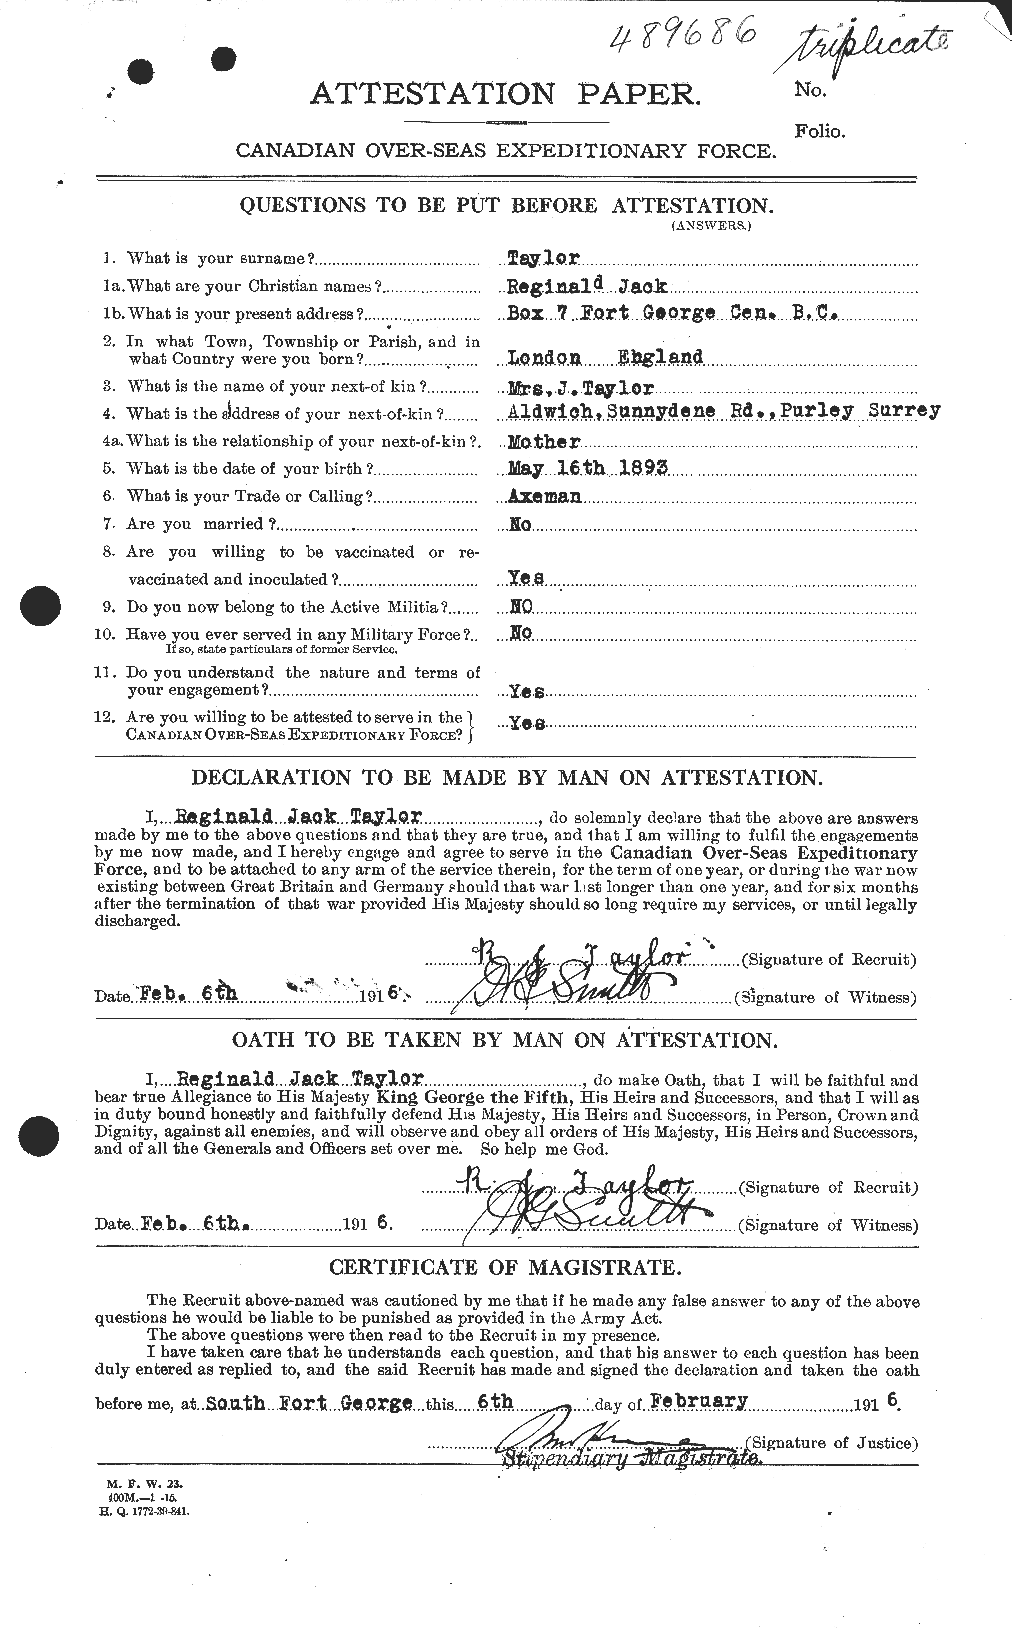 Personnel Records of the First World War - CEF 627804a